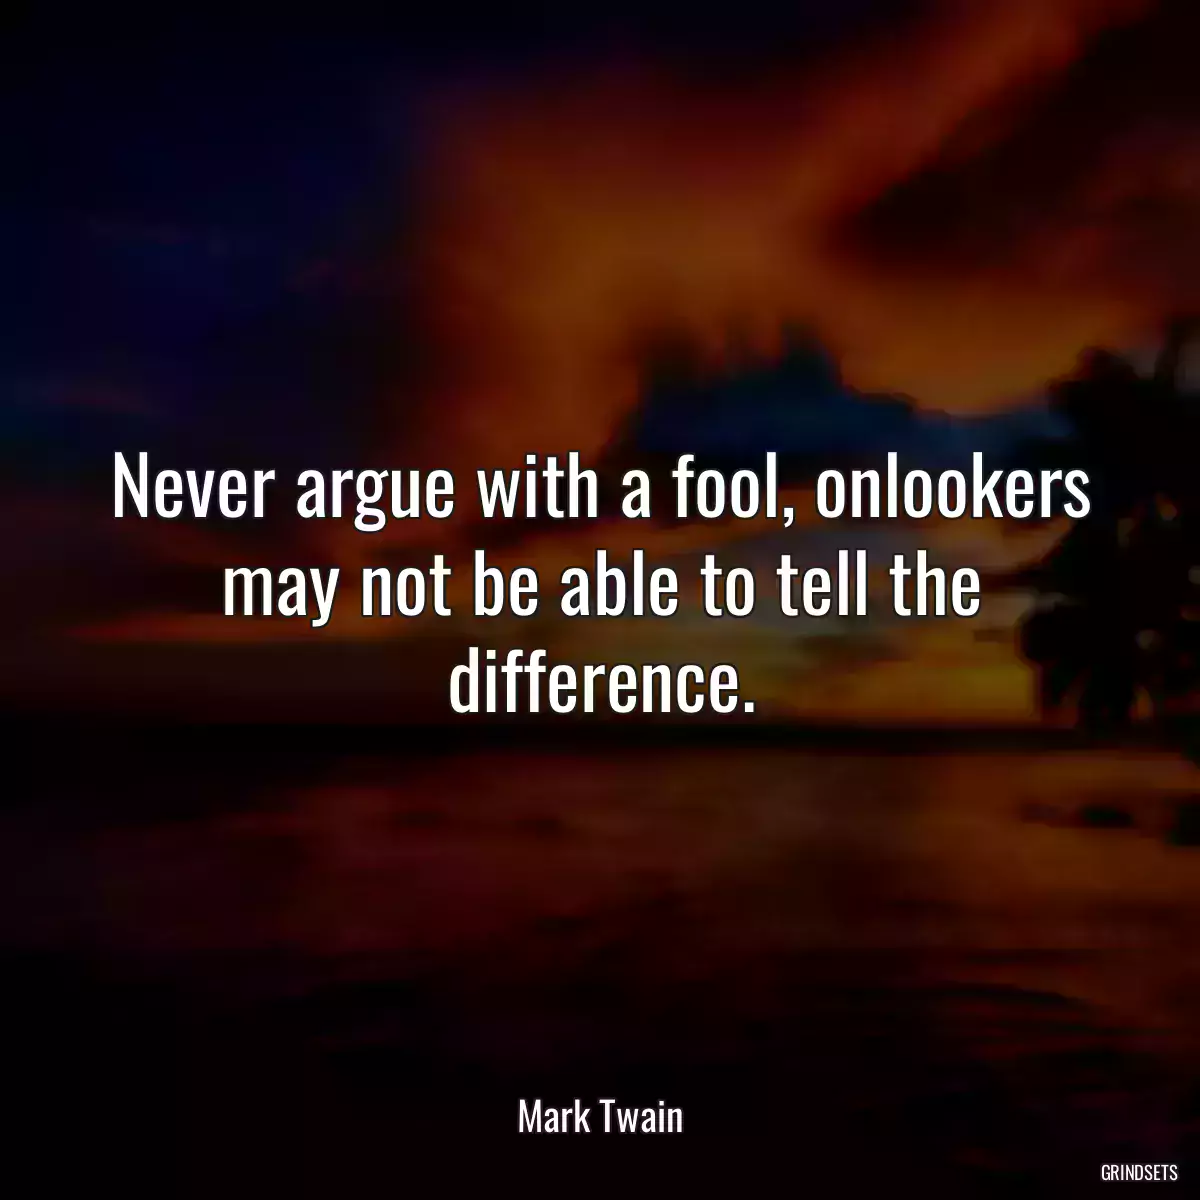 Never argue with a fool, onlookers may not be able to tell the difference.